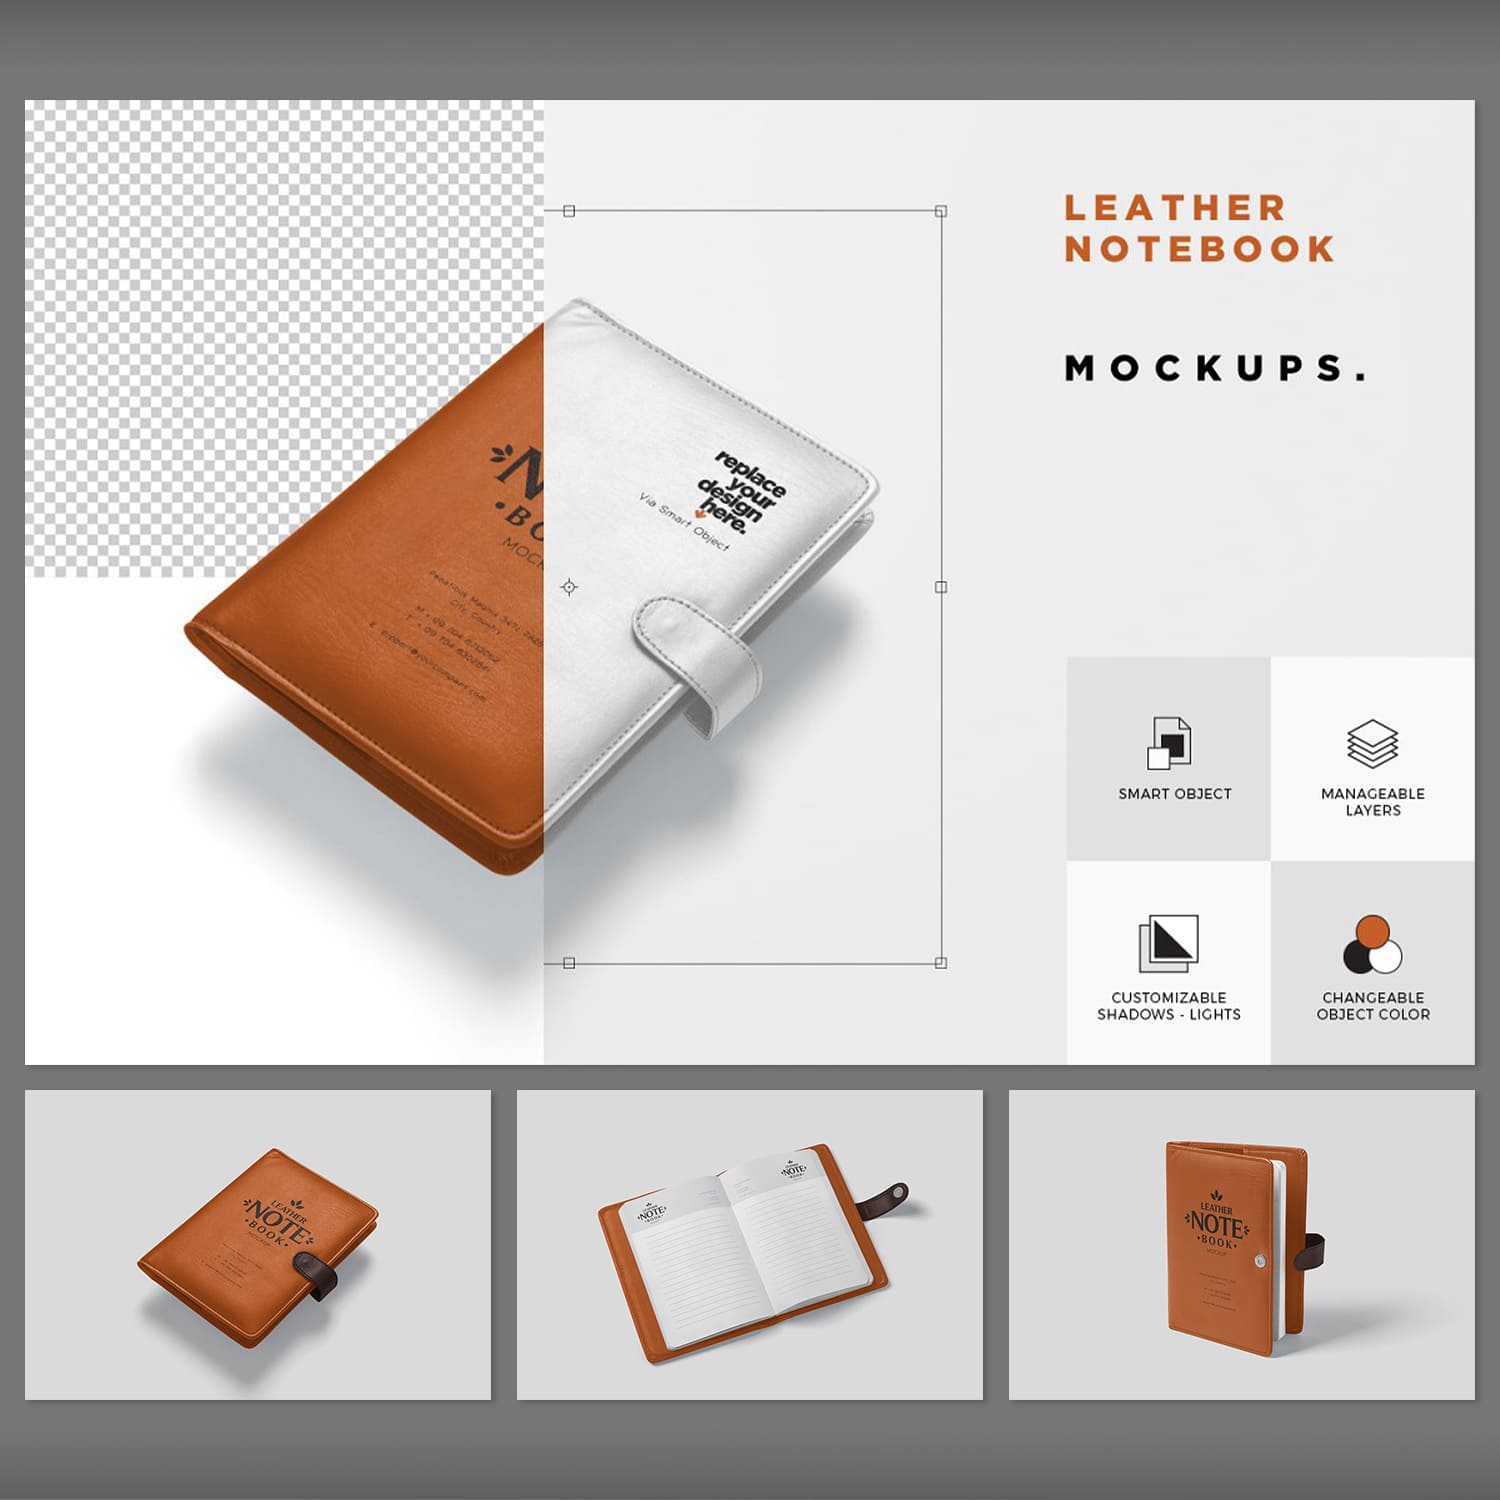 A pack of images of leather notebooks with a charming design.